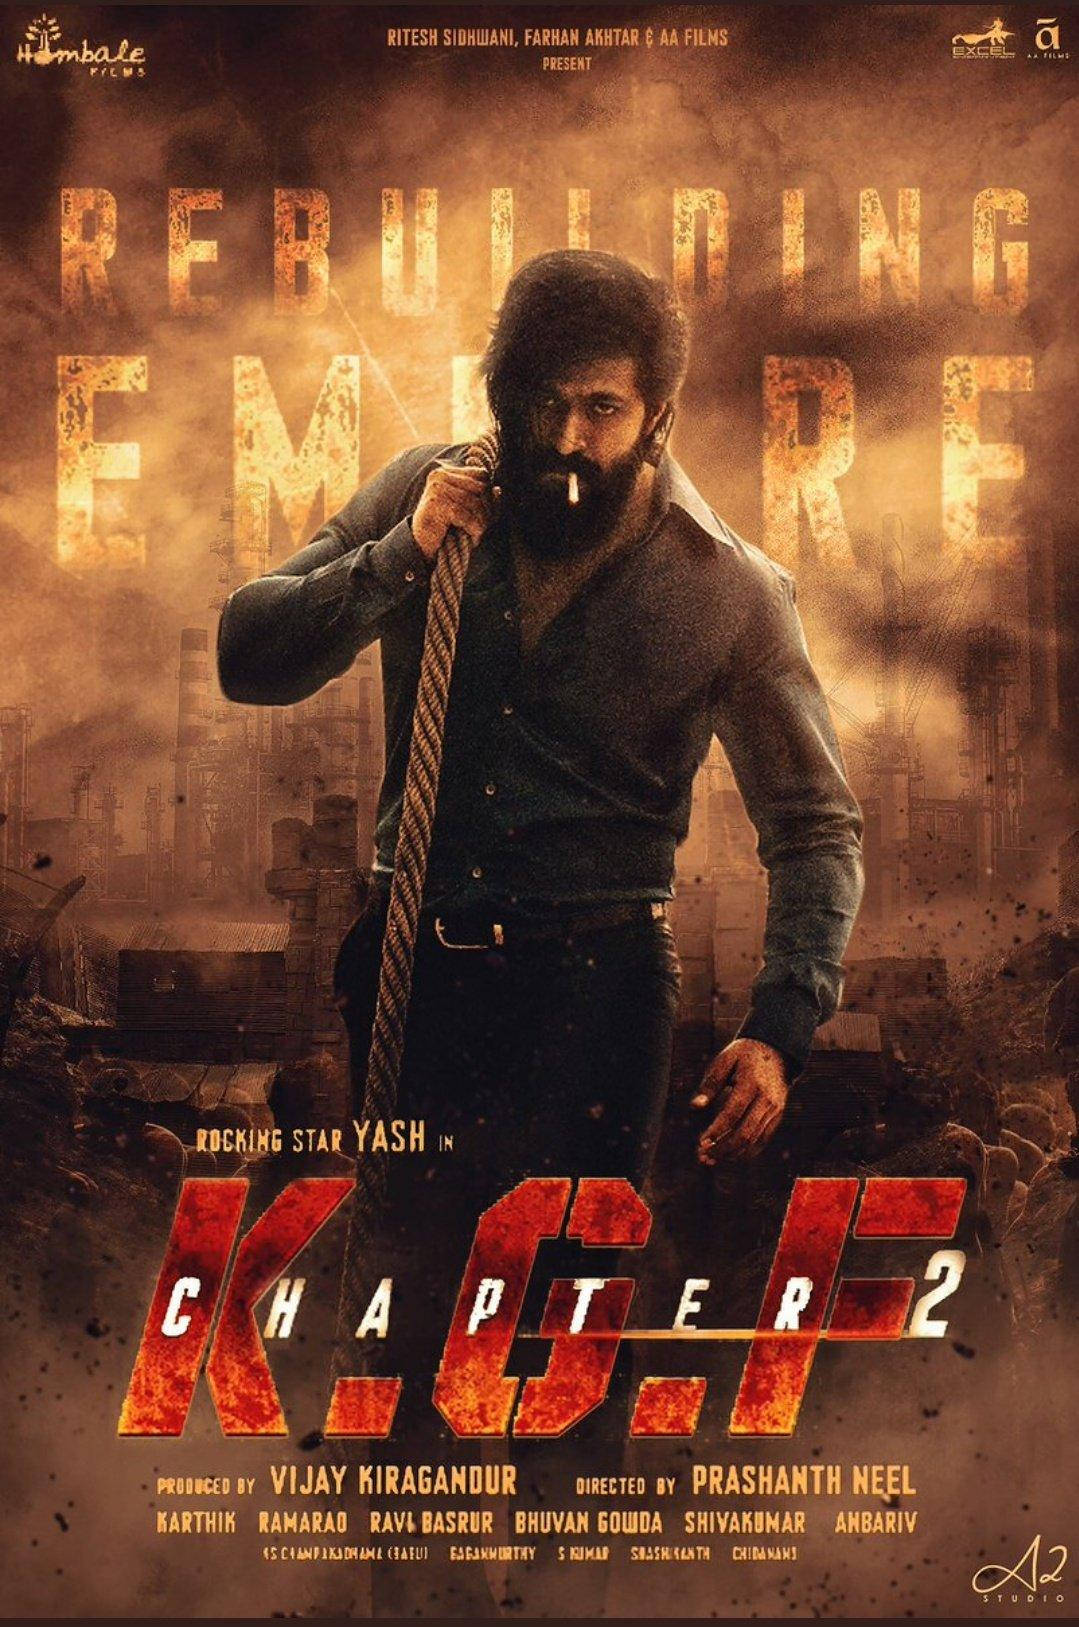 Cool Kgf Chapter 2 Poster Wallpaper